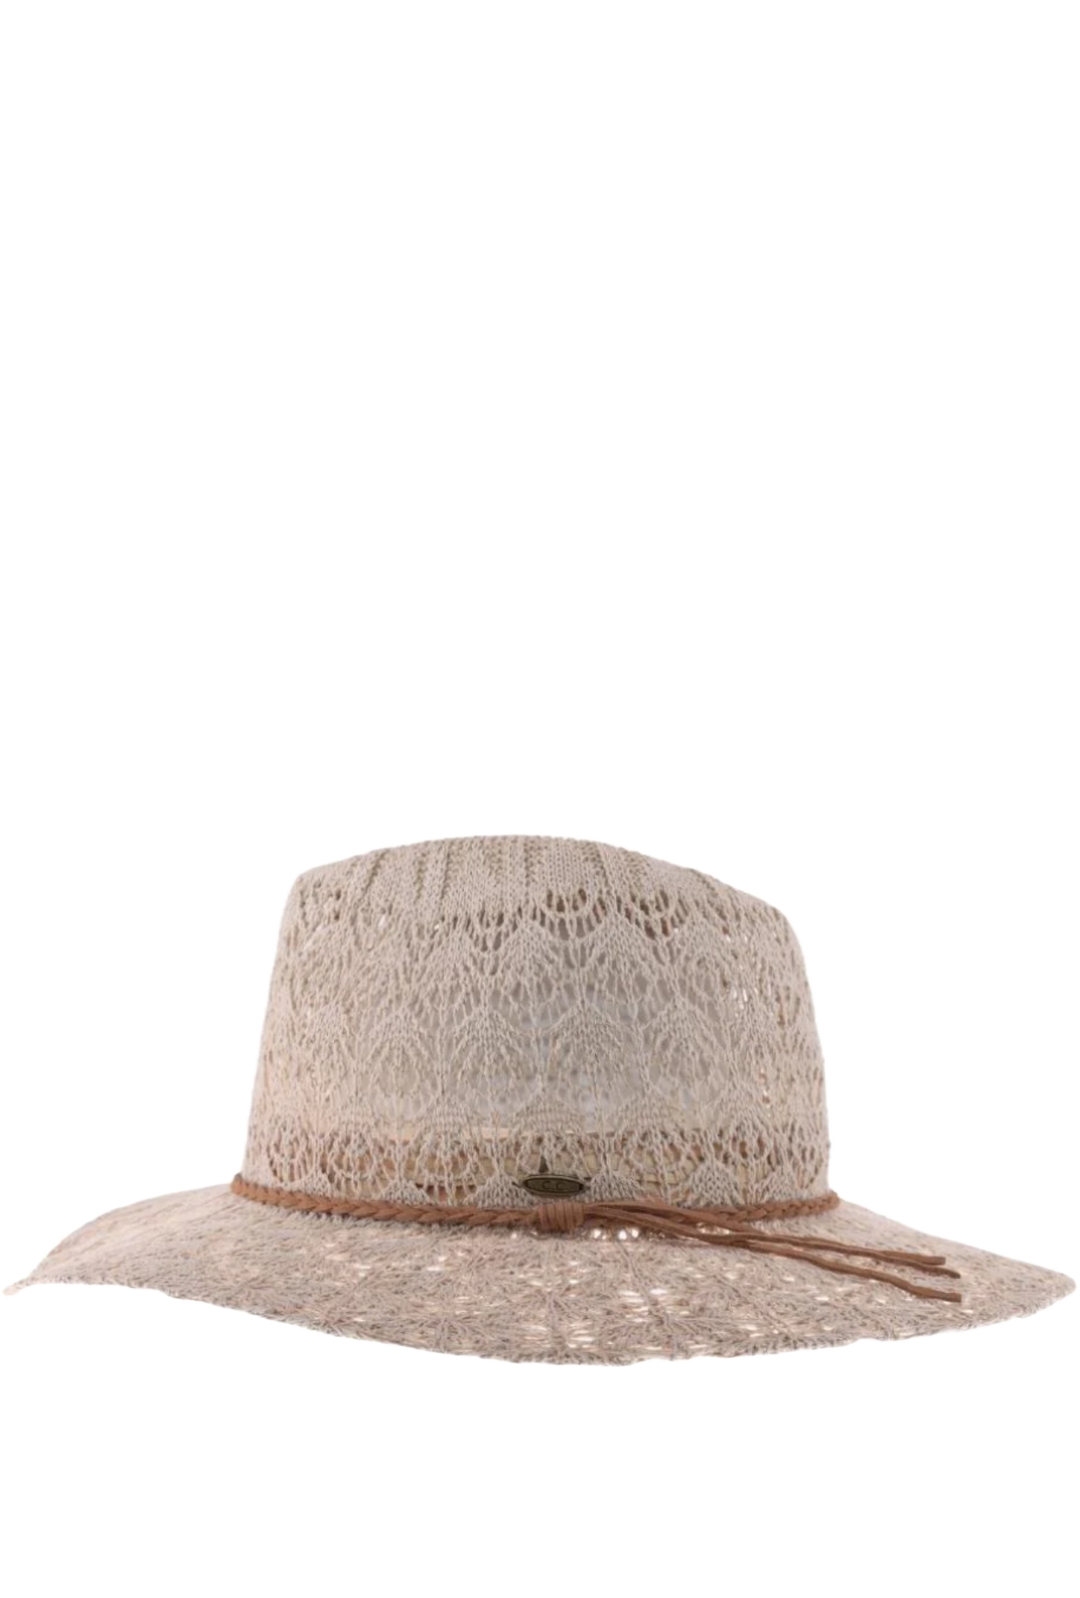 Horseshoe Lace Knit with Braided Suede Trim Panama Hat- Light Taupe